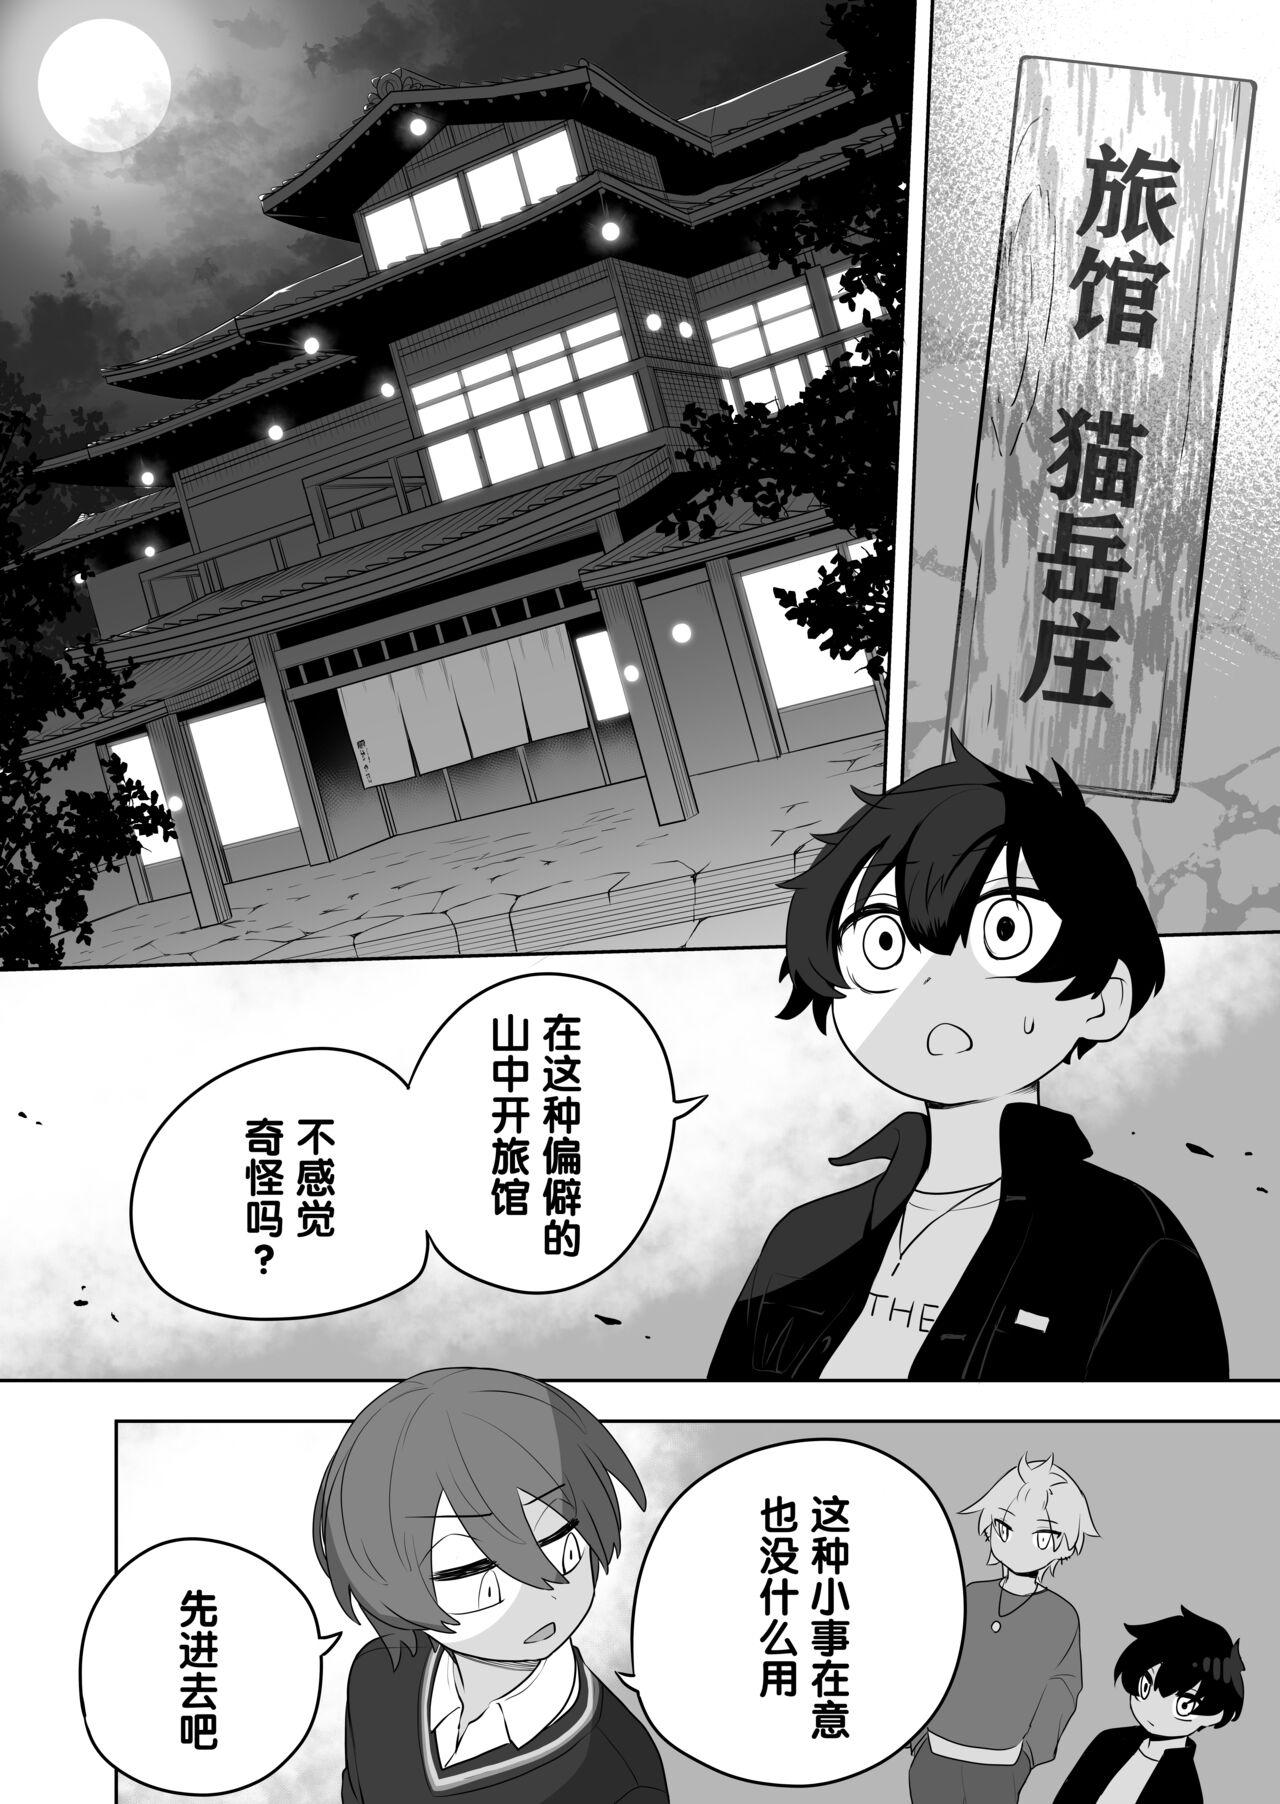 Family Roleplay 猫山怪闻 Spoon - Page 4